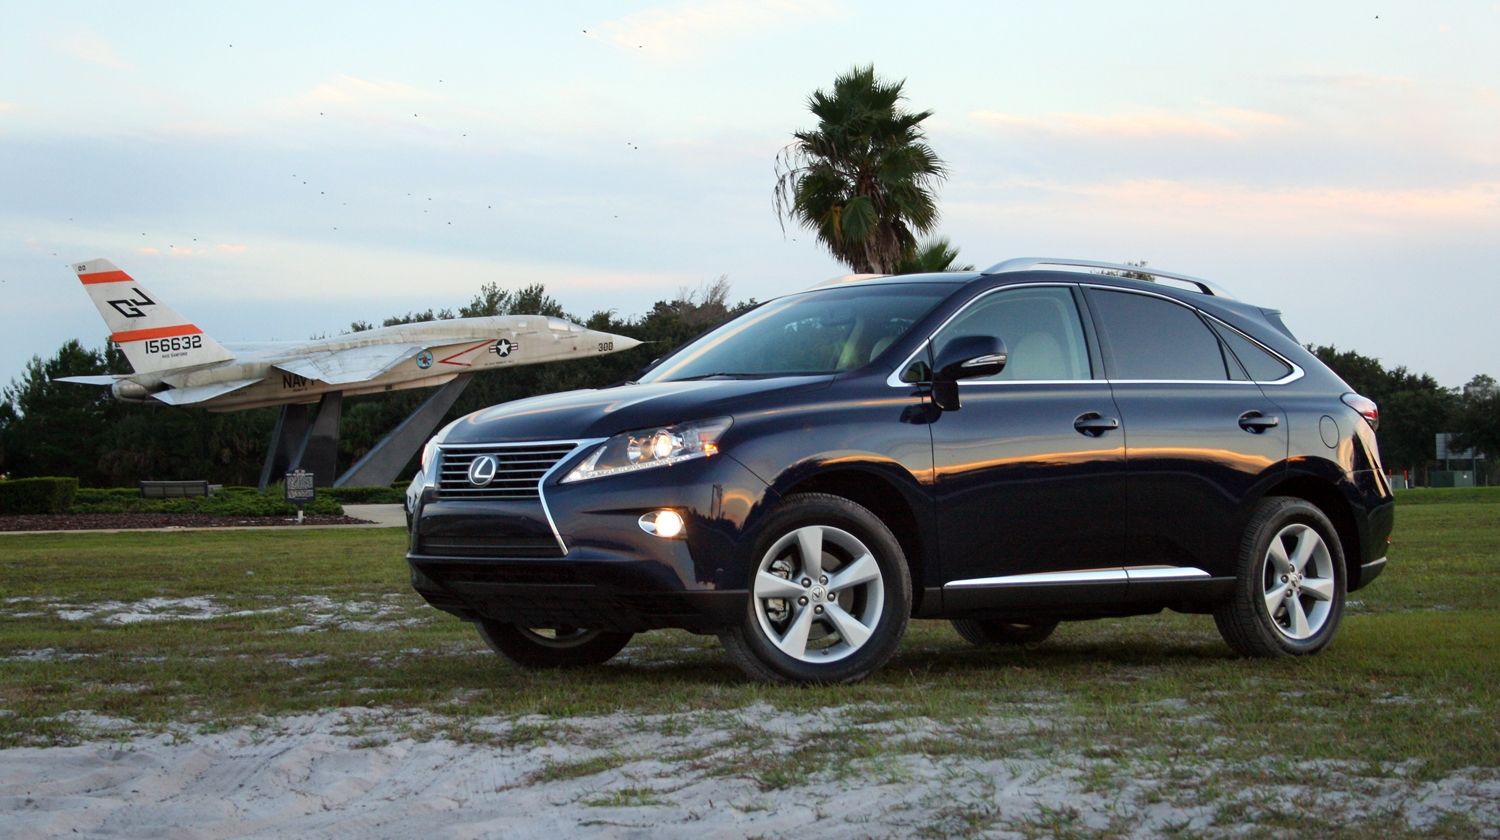  Mark McNabb had a week with the 2014 Lexus RX 350. Check out his thoughts at TopSpeed.com.